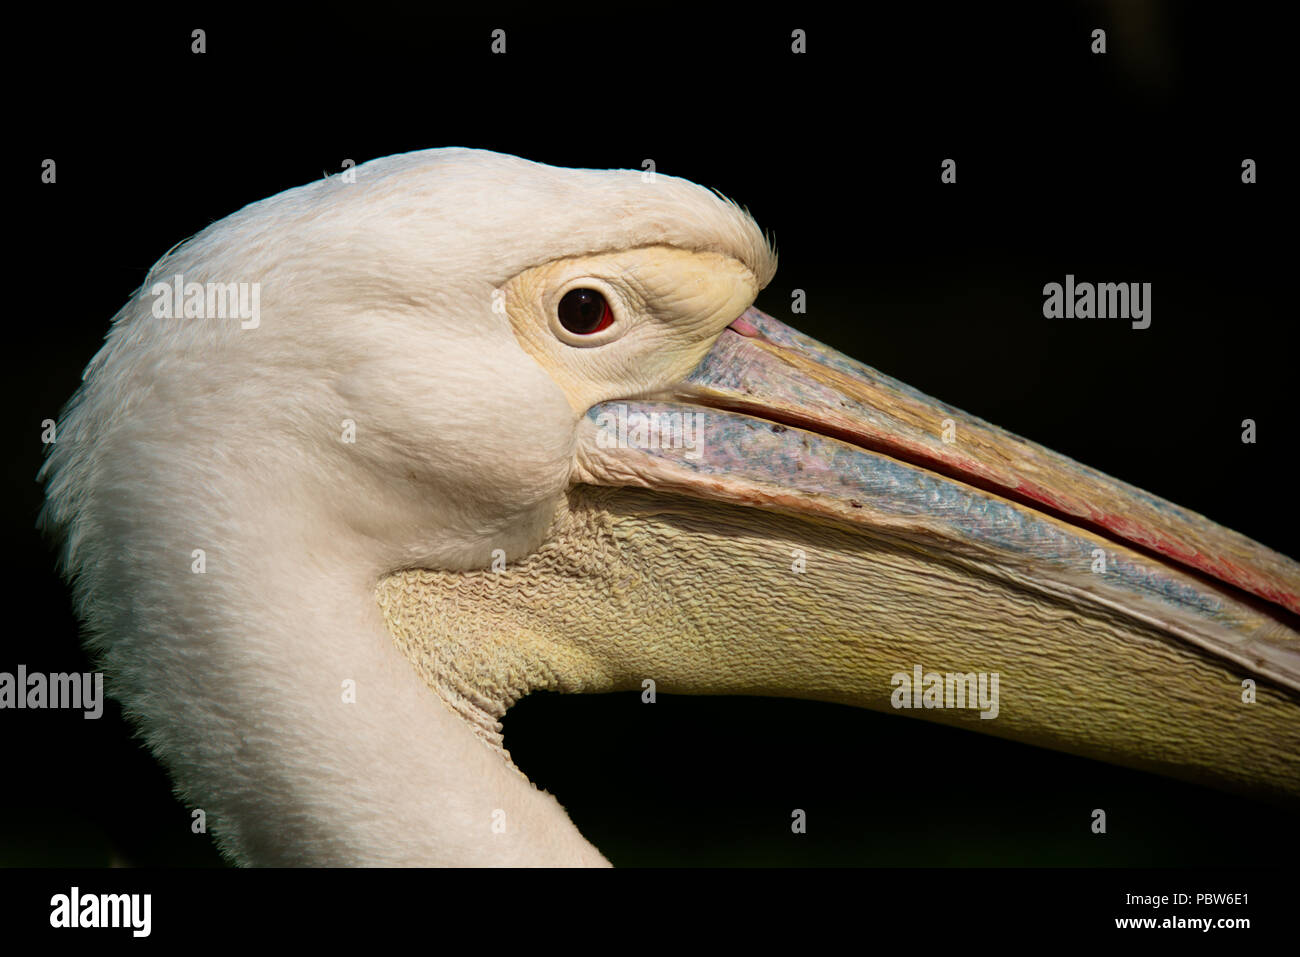 A very close up profile photograph of a pelican facing right. This shows the eye and part of the beak. It has a black background with copy space Stock Photo